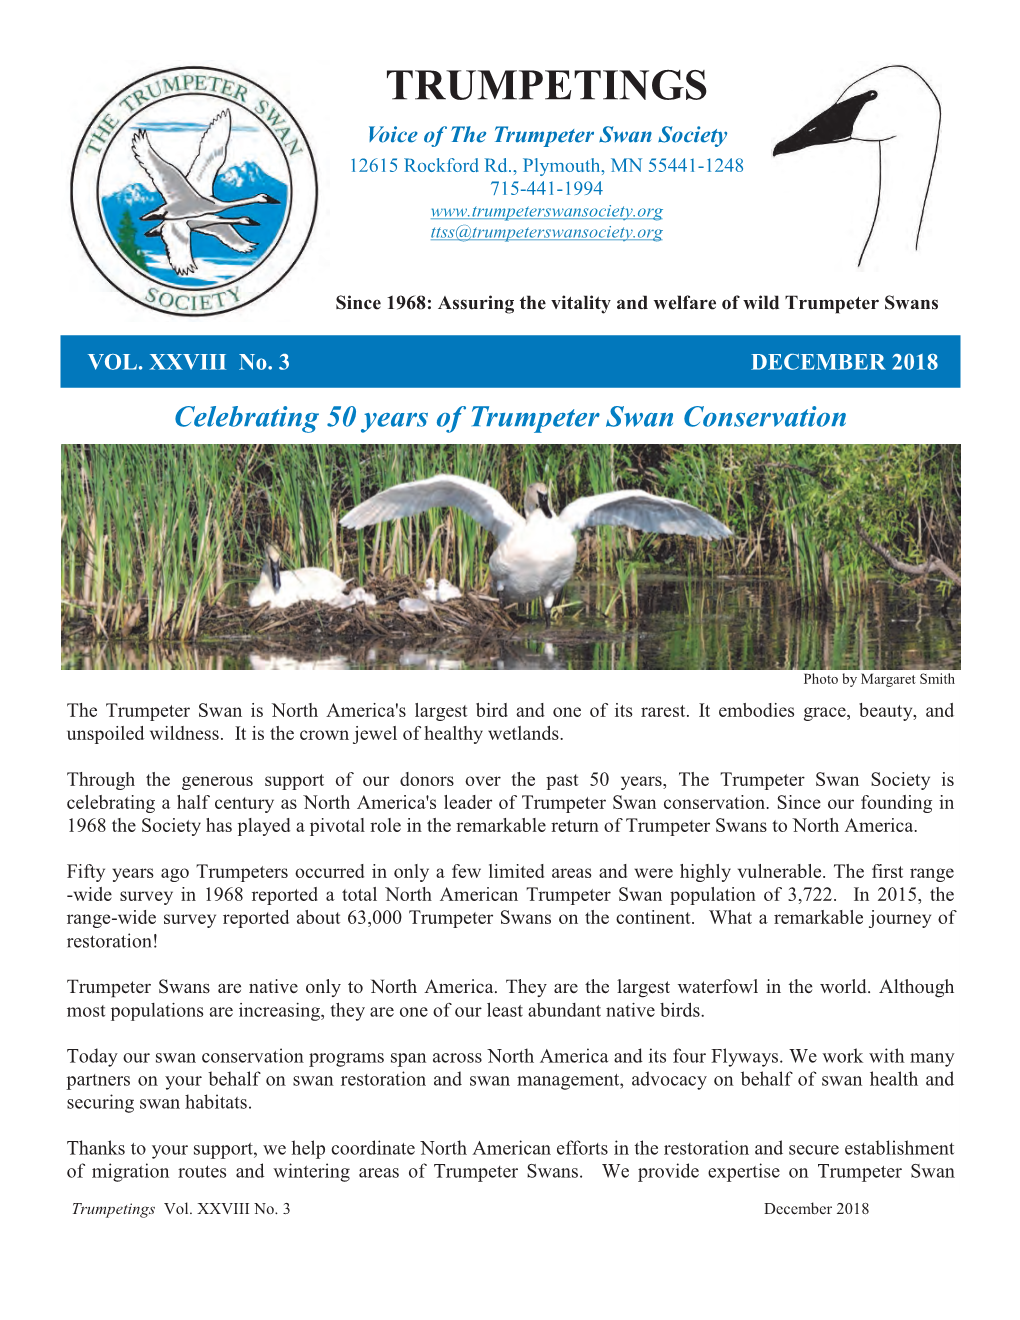 TRUMPETINGS Voice of the Trumpeter Swan Society 12615 Rockford Rd., Plymouth, MN 55441-1248 715-441-1994 Ttss@Trumpeterswansociety.Org